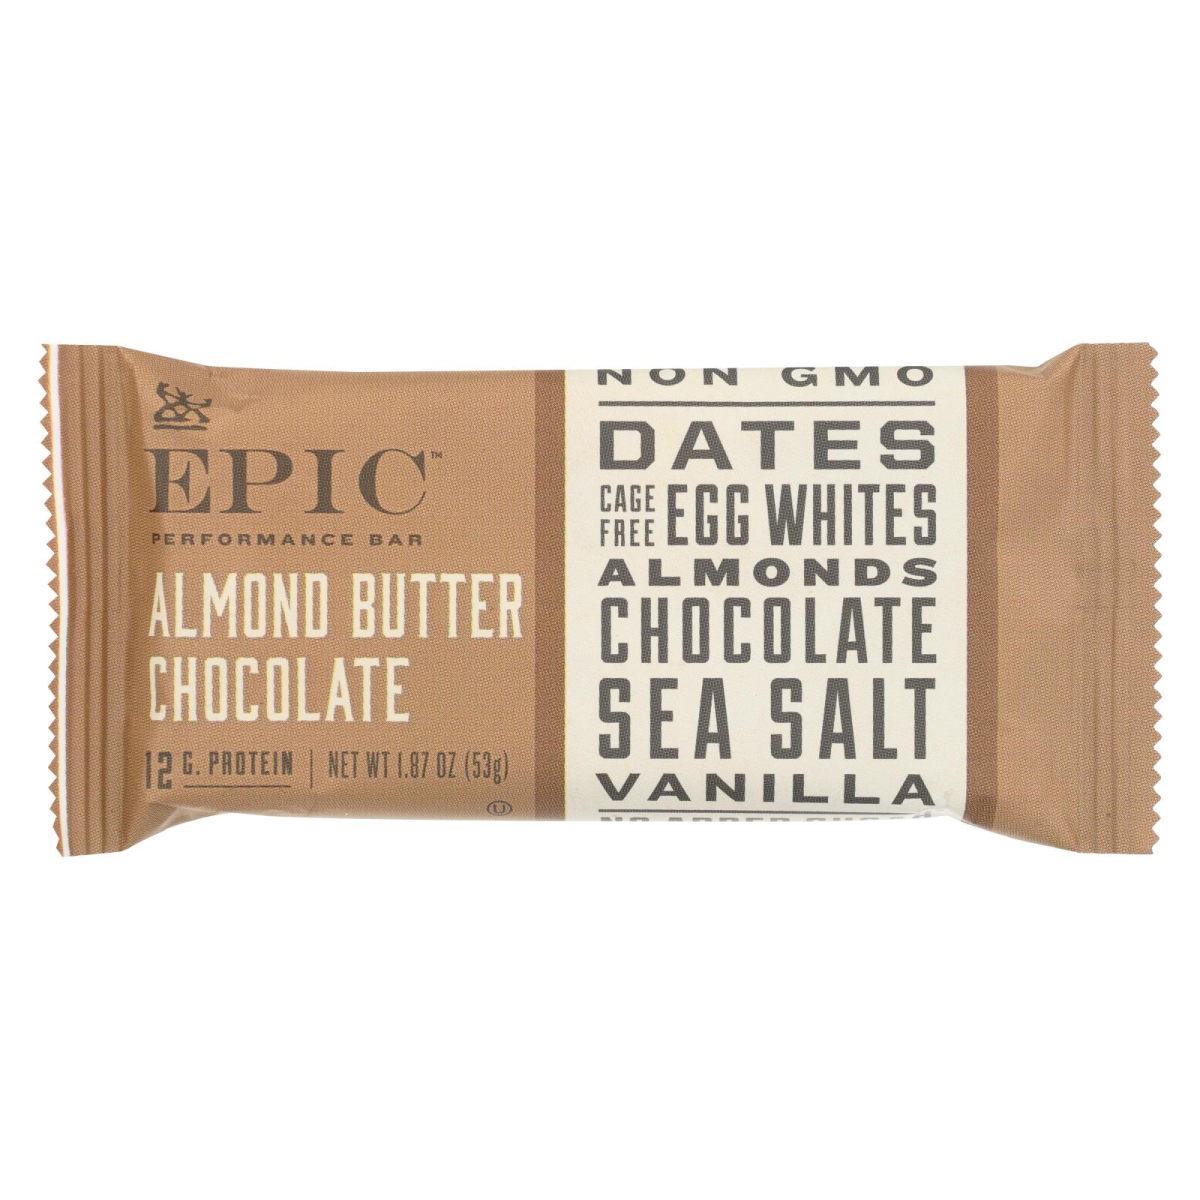 Epic 2275089 1.87 Oz Performance Almond Butter Chocolate Bar, Pack Of 9